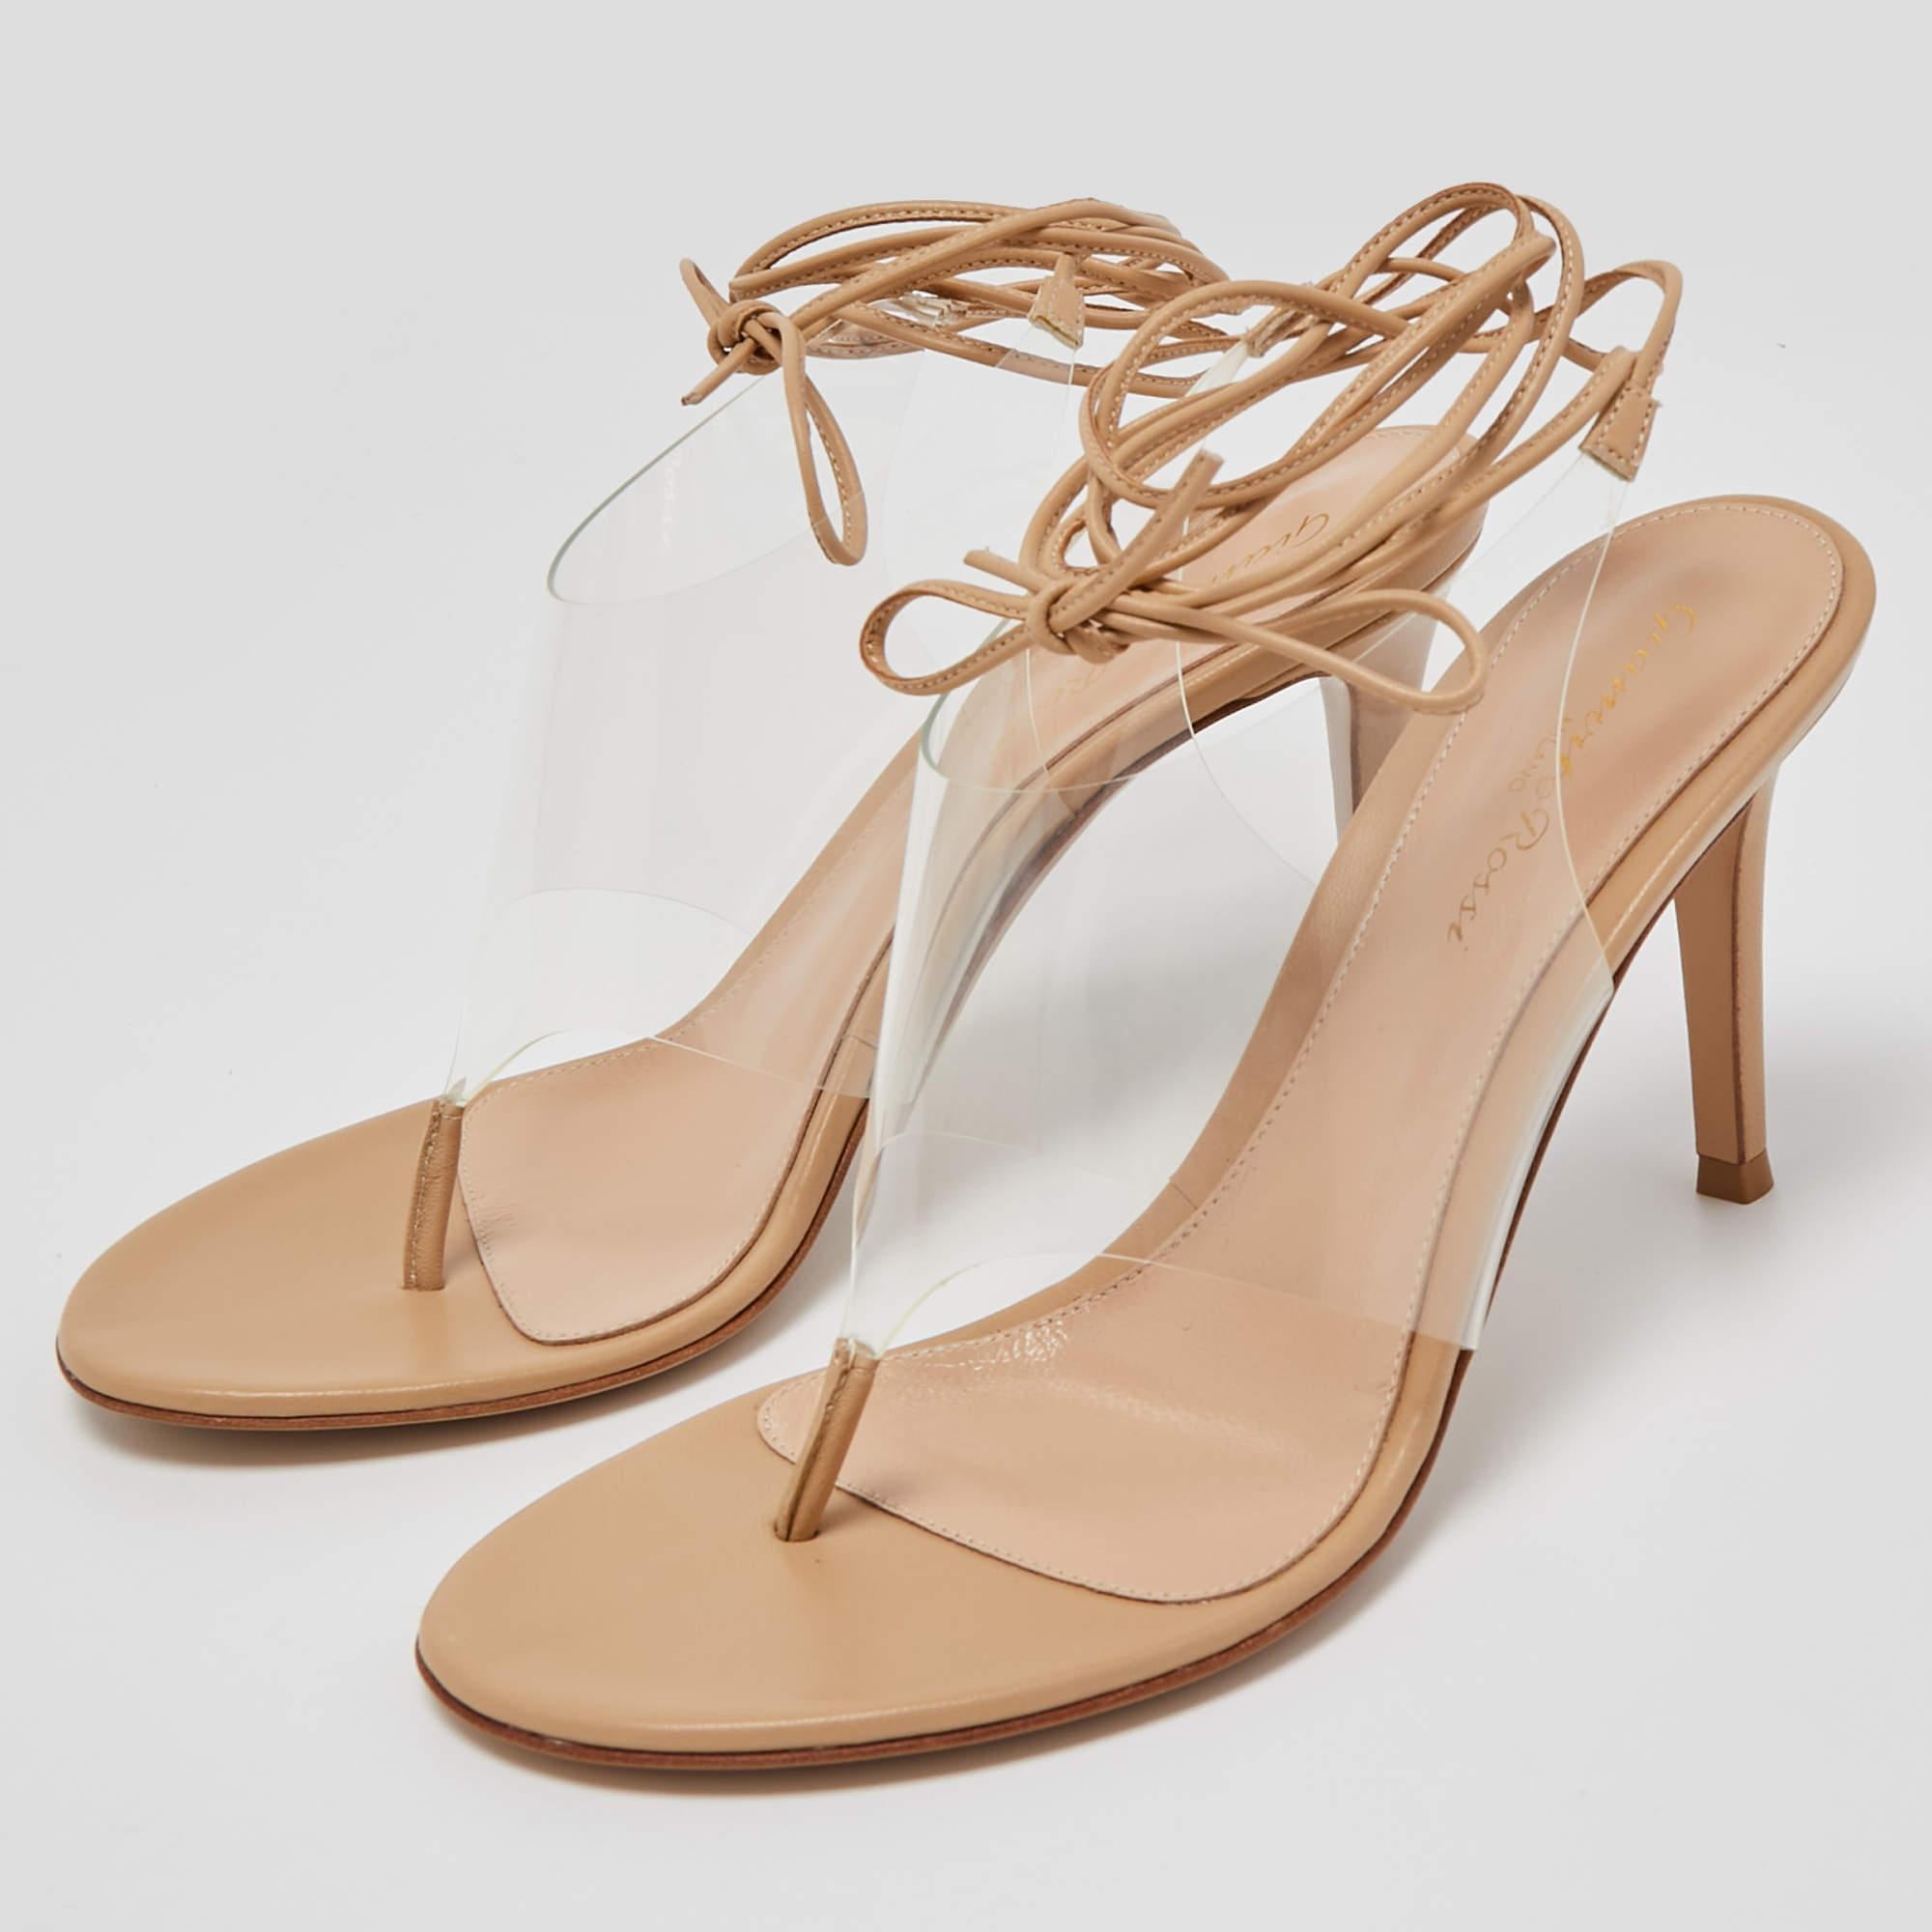 Gianvito Rossi Beige Leather and PVC Ankle Wrap Sandals Size 37.5 For Sale 2